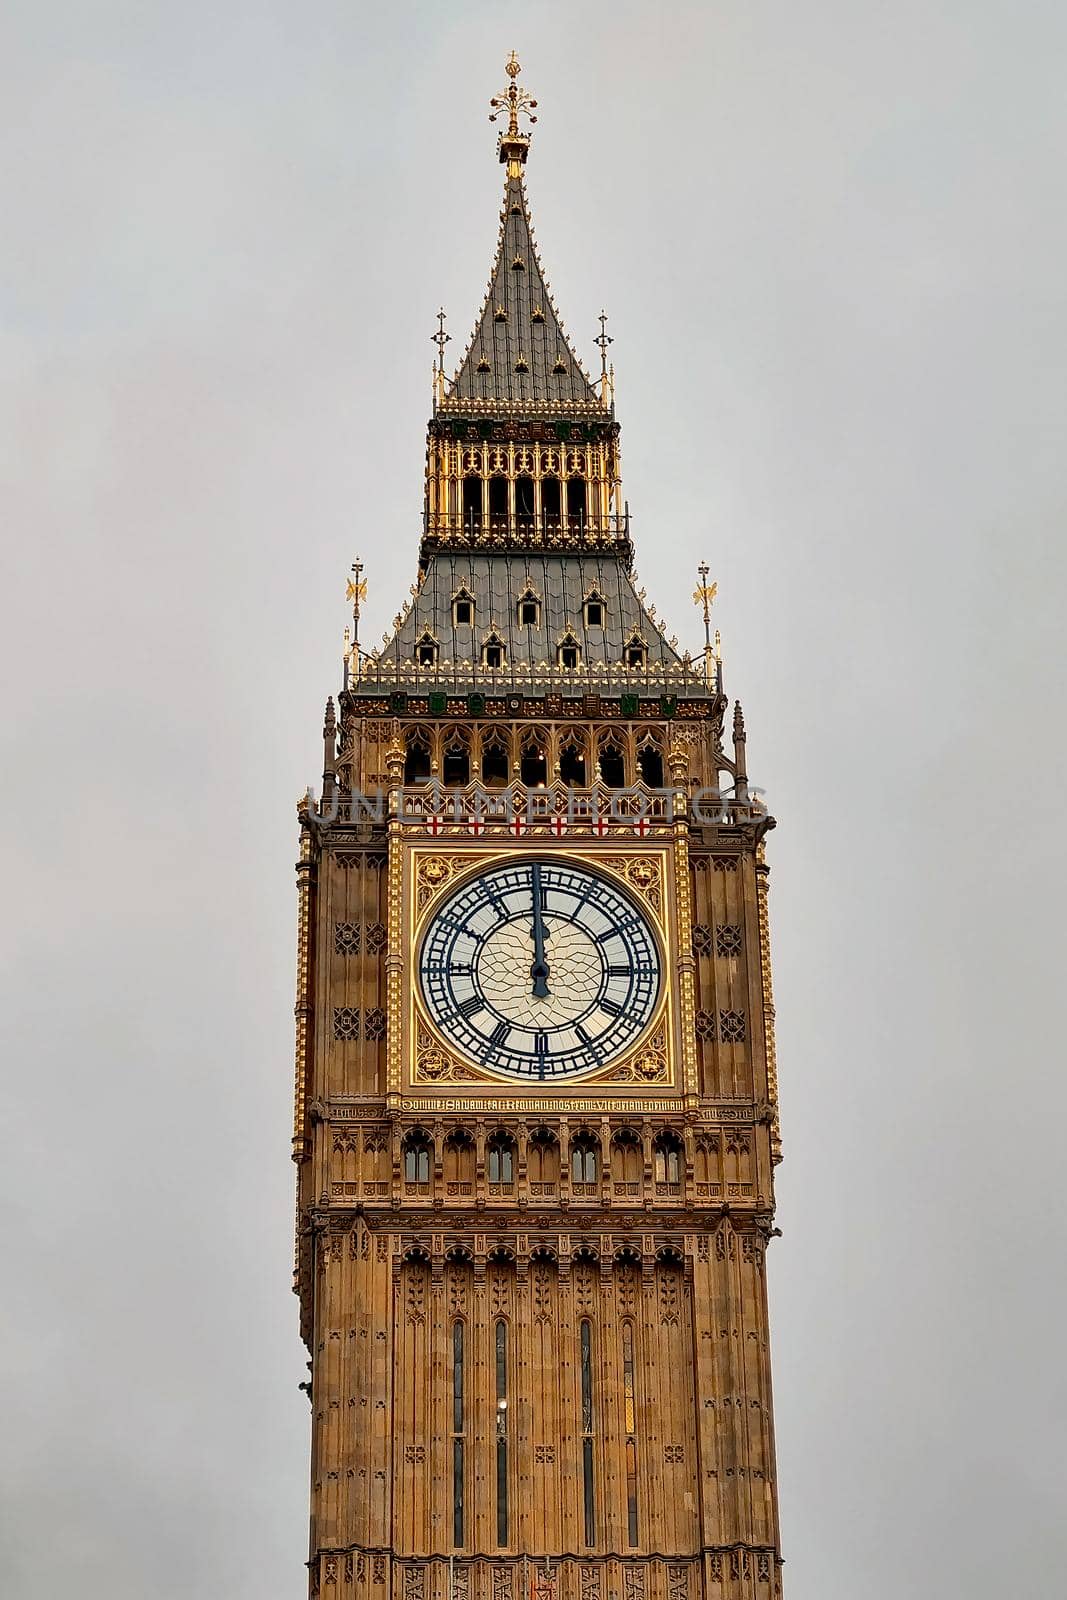 London, United Kingdom, February 6, 2022: Big Ben is the popular tourist name for the clock tower at the Palace of Westminster